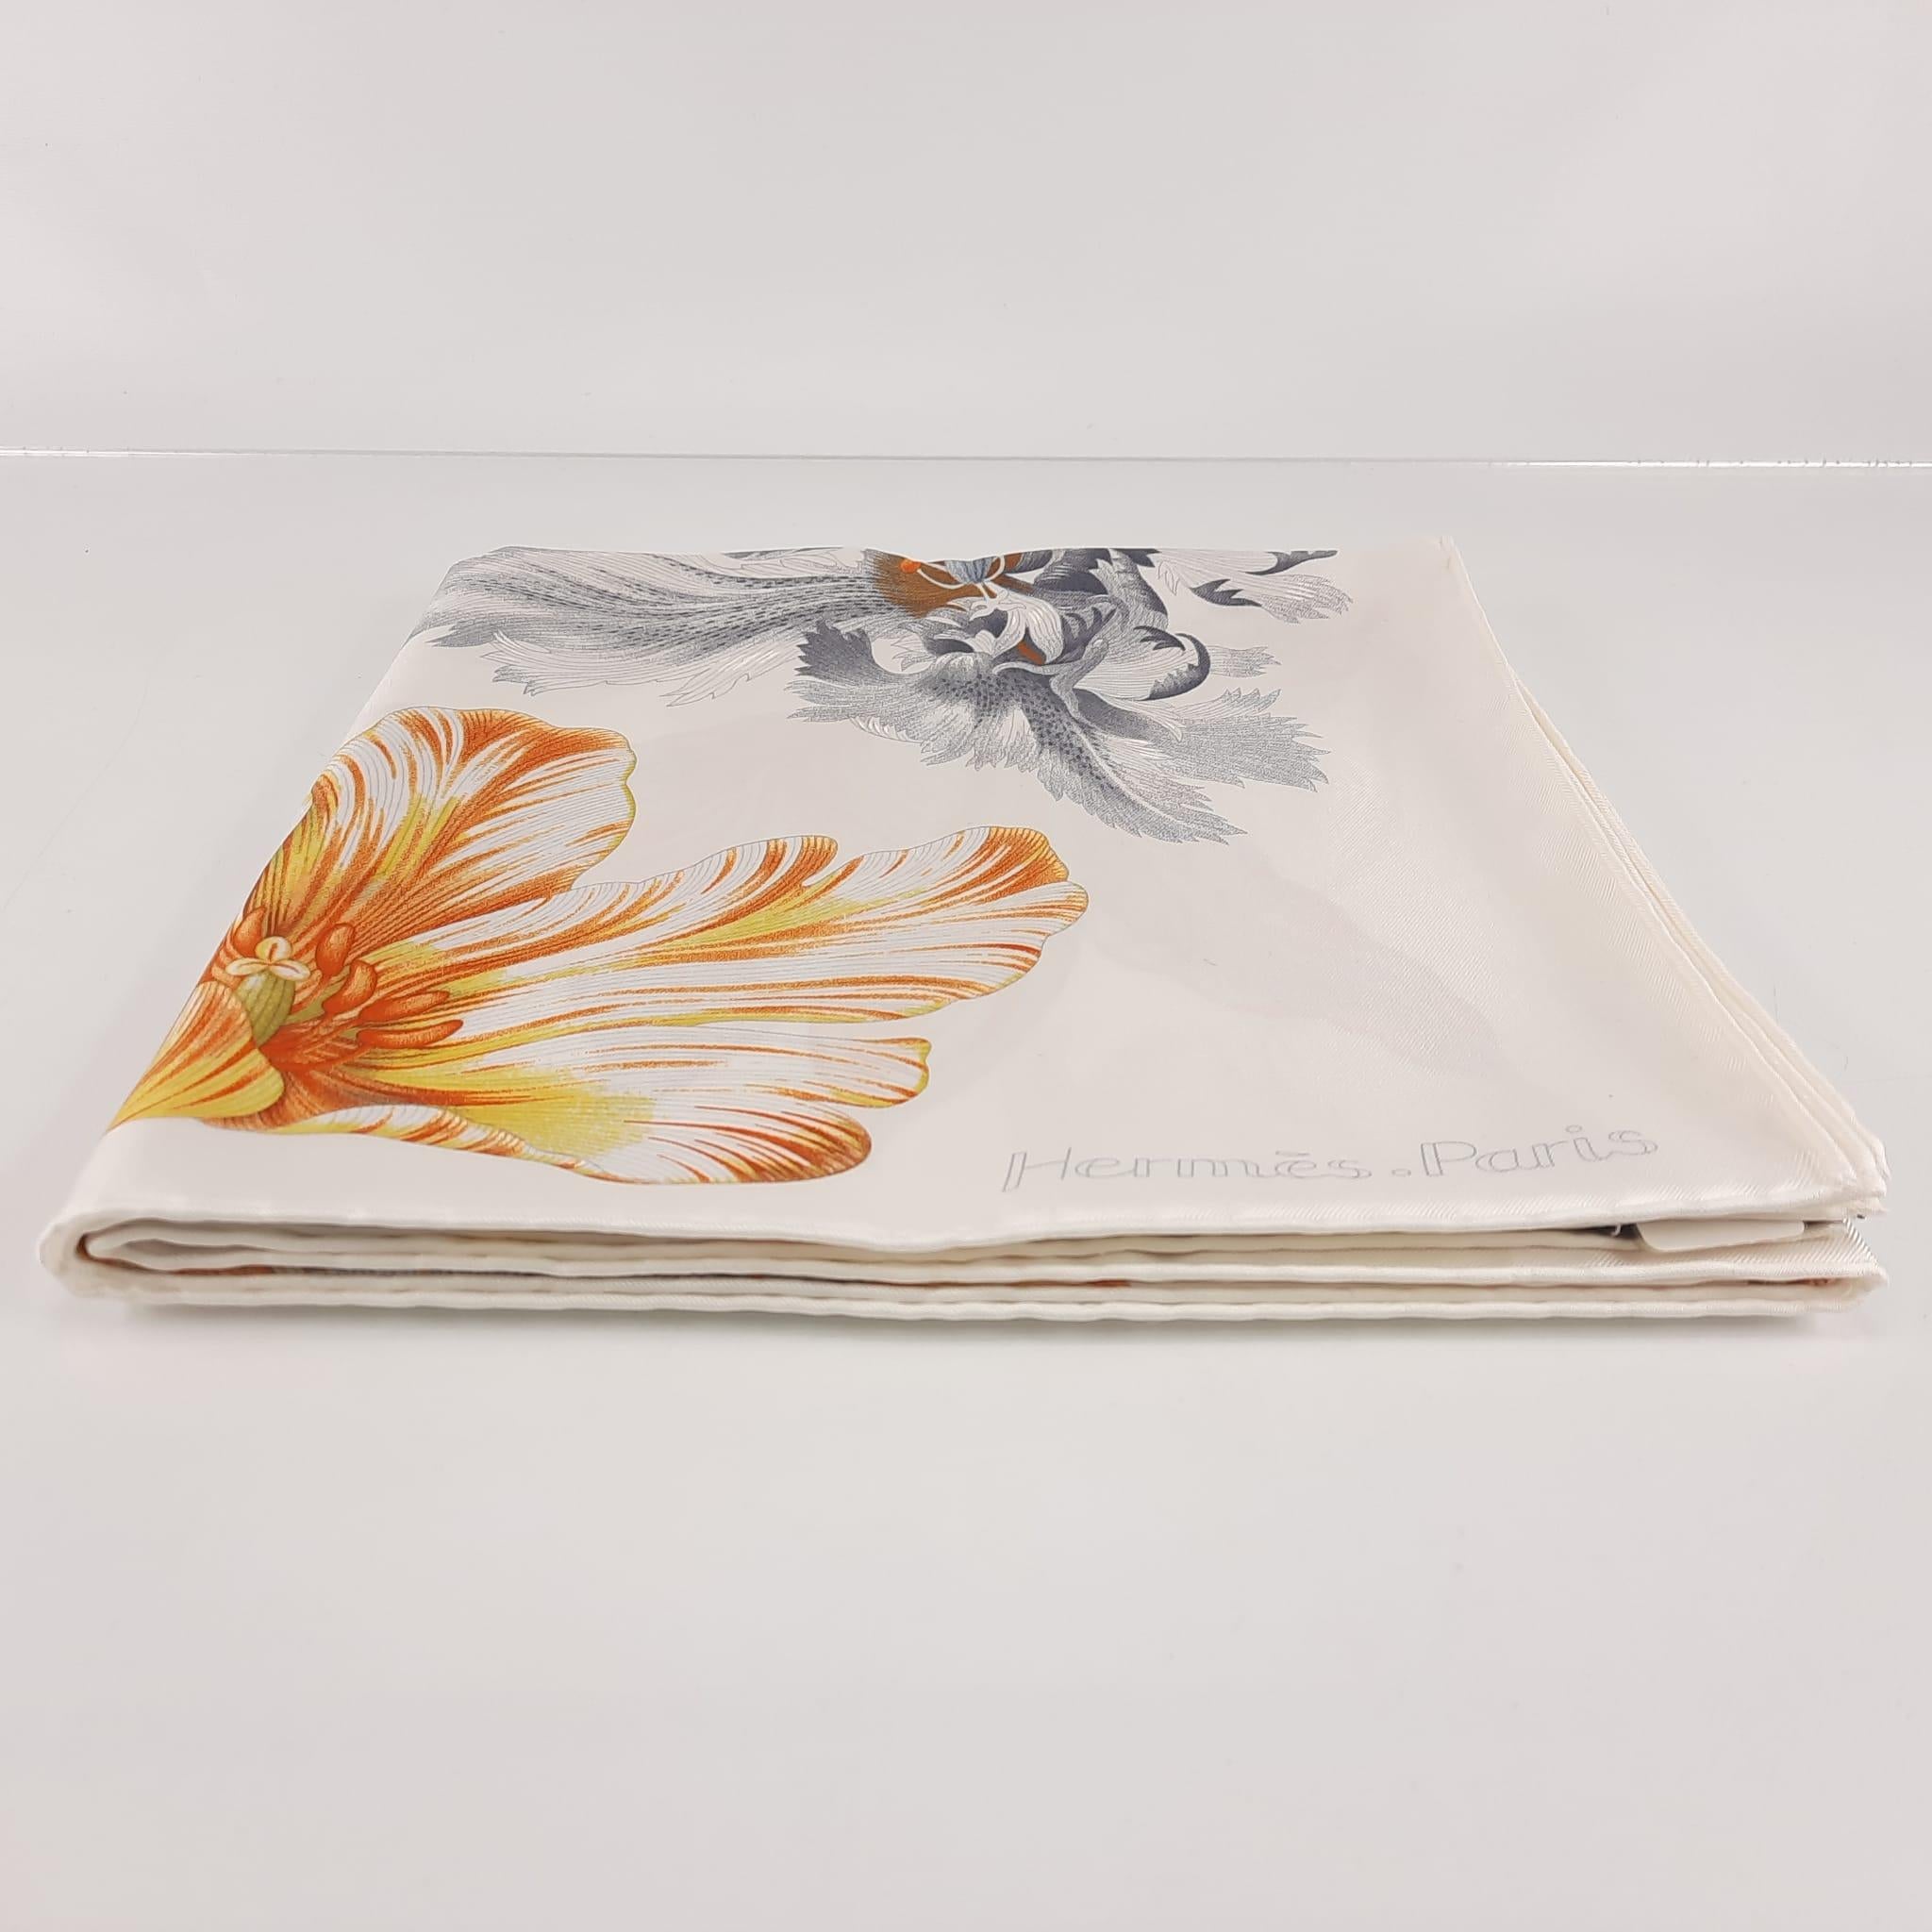 Scarf in silk twill with hand-rolled edges
This essential Hermès accessory complements any outfit. It can be worn many ways - around your neck, as a top, at the waist or as a headscarf!
Made in France
Designed by Aline Honoré
Dimensions: 90 x 90 cm